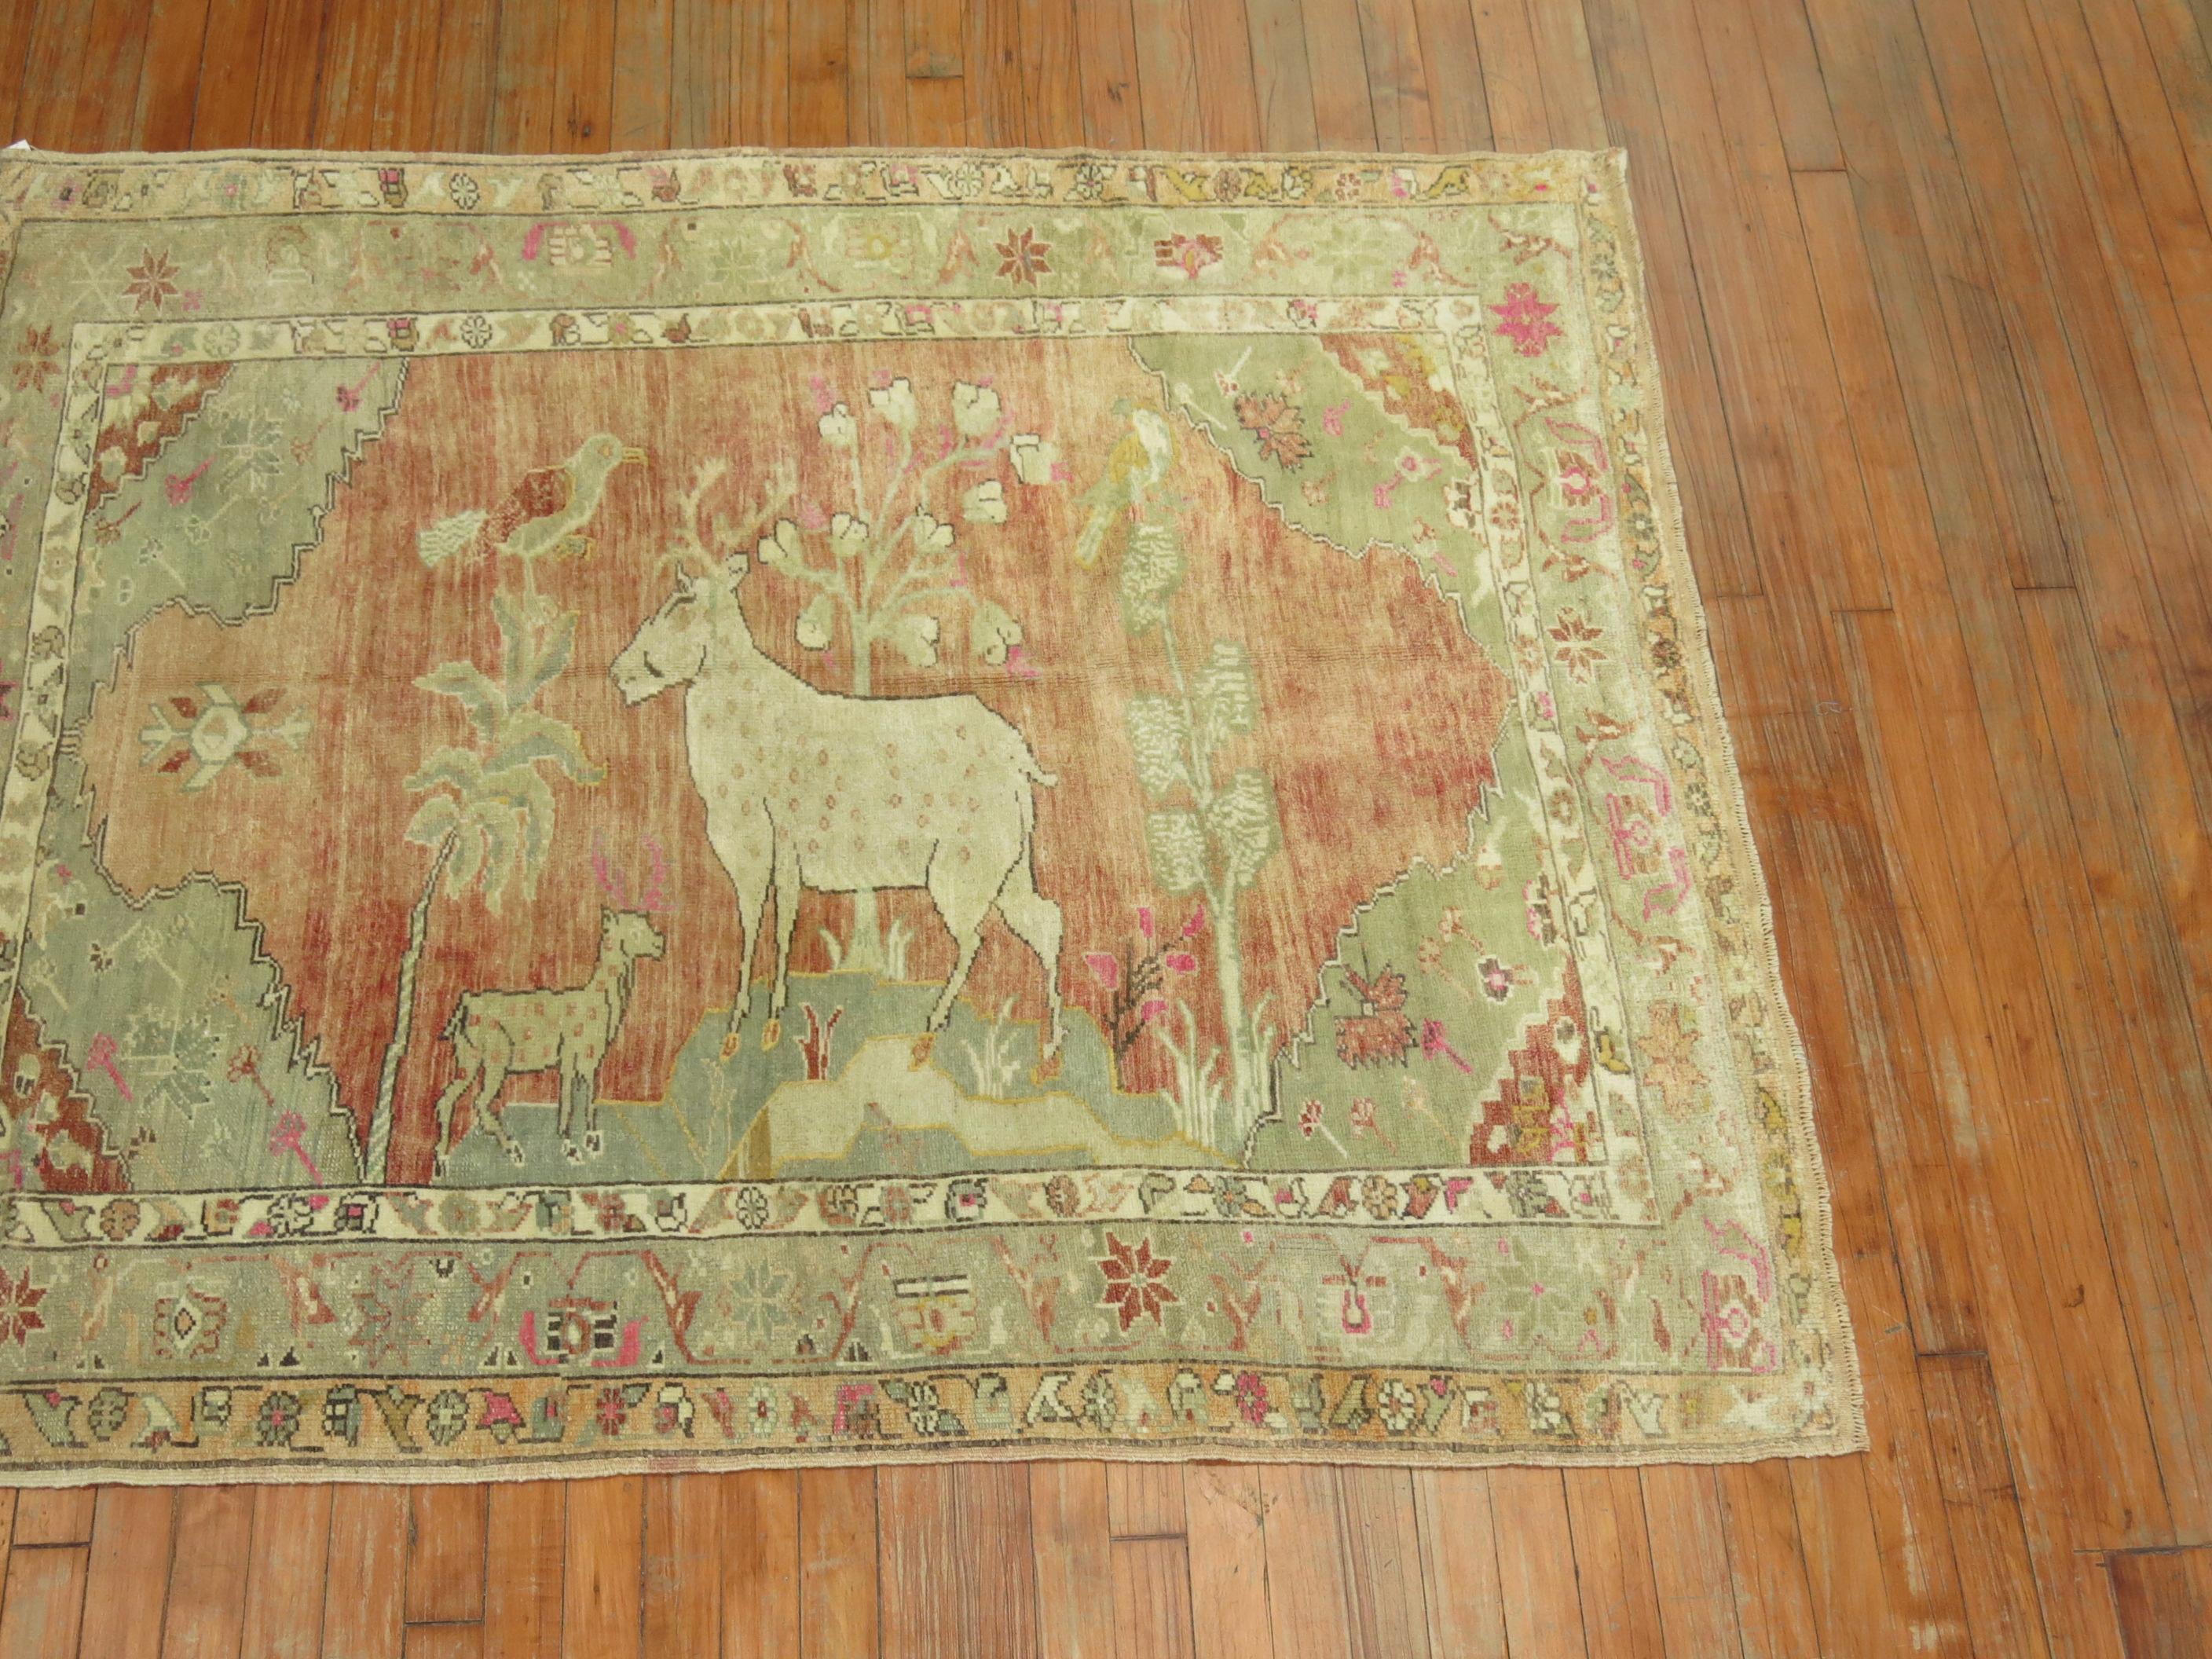 Pictorial Turkish Deer Pictorial Animal Rug In Good Condition For Sale In New York, NY